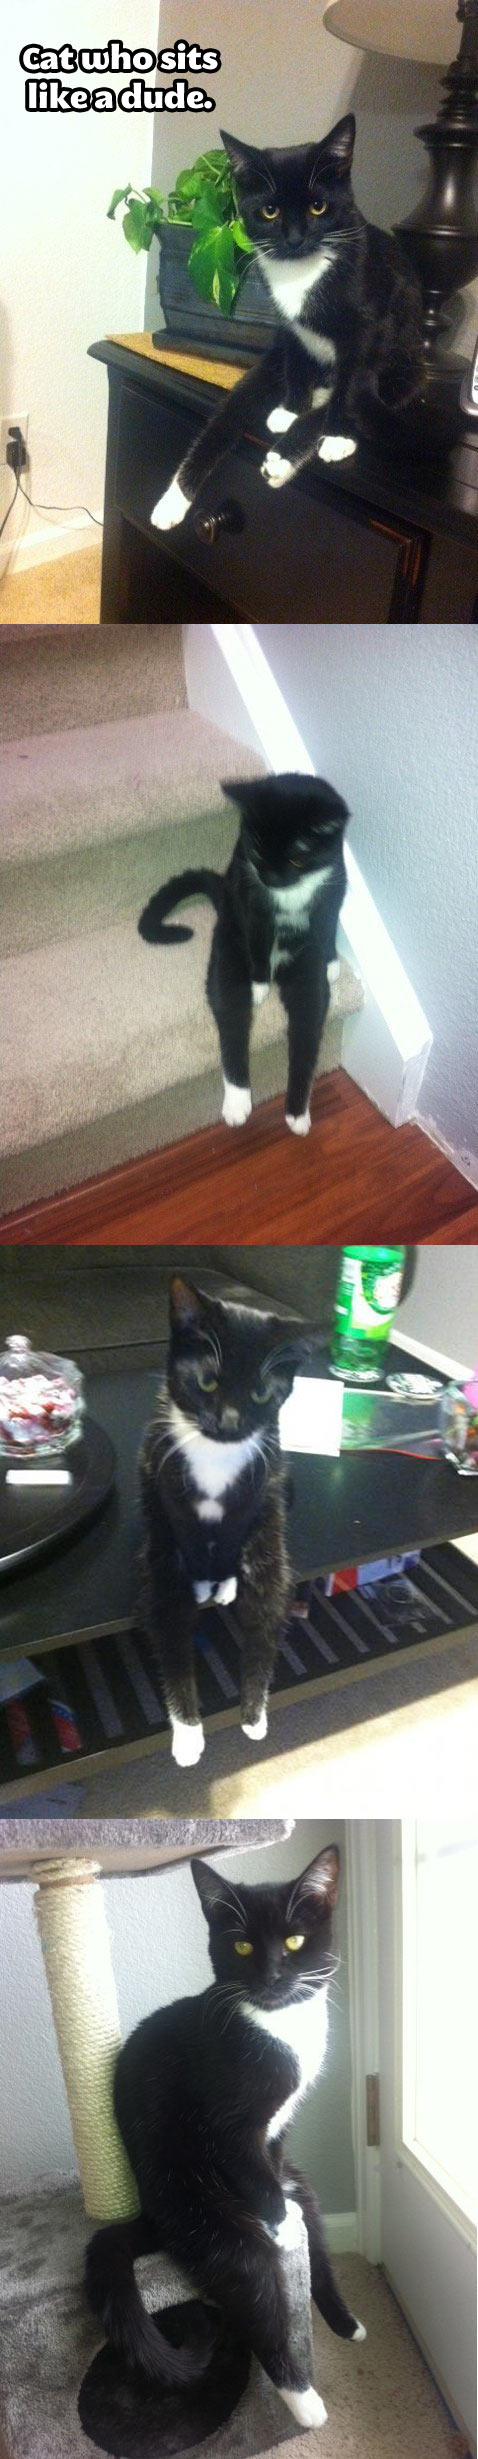 The cat who sits like a dude…